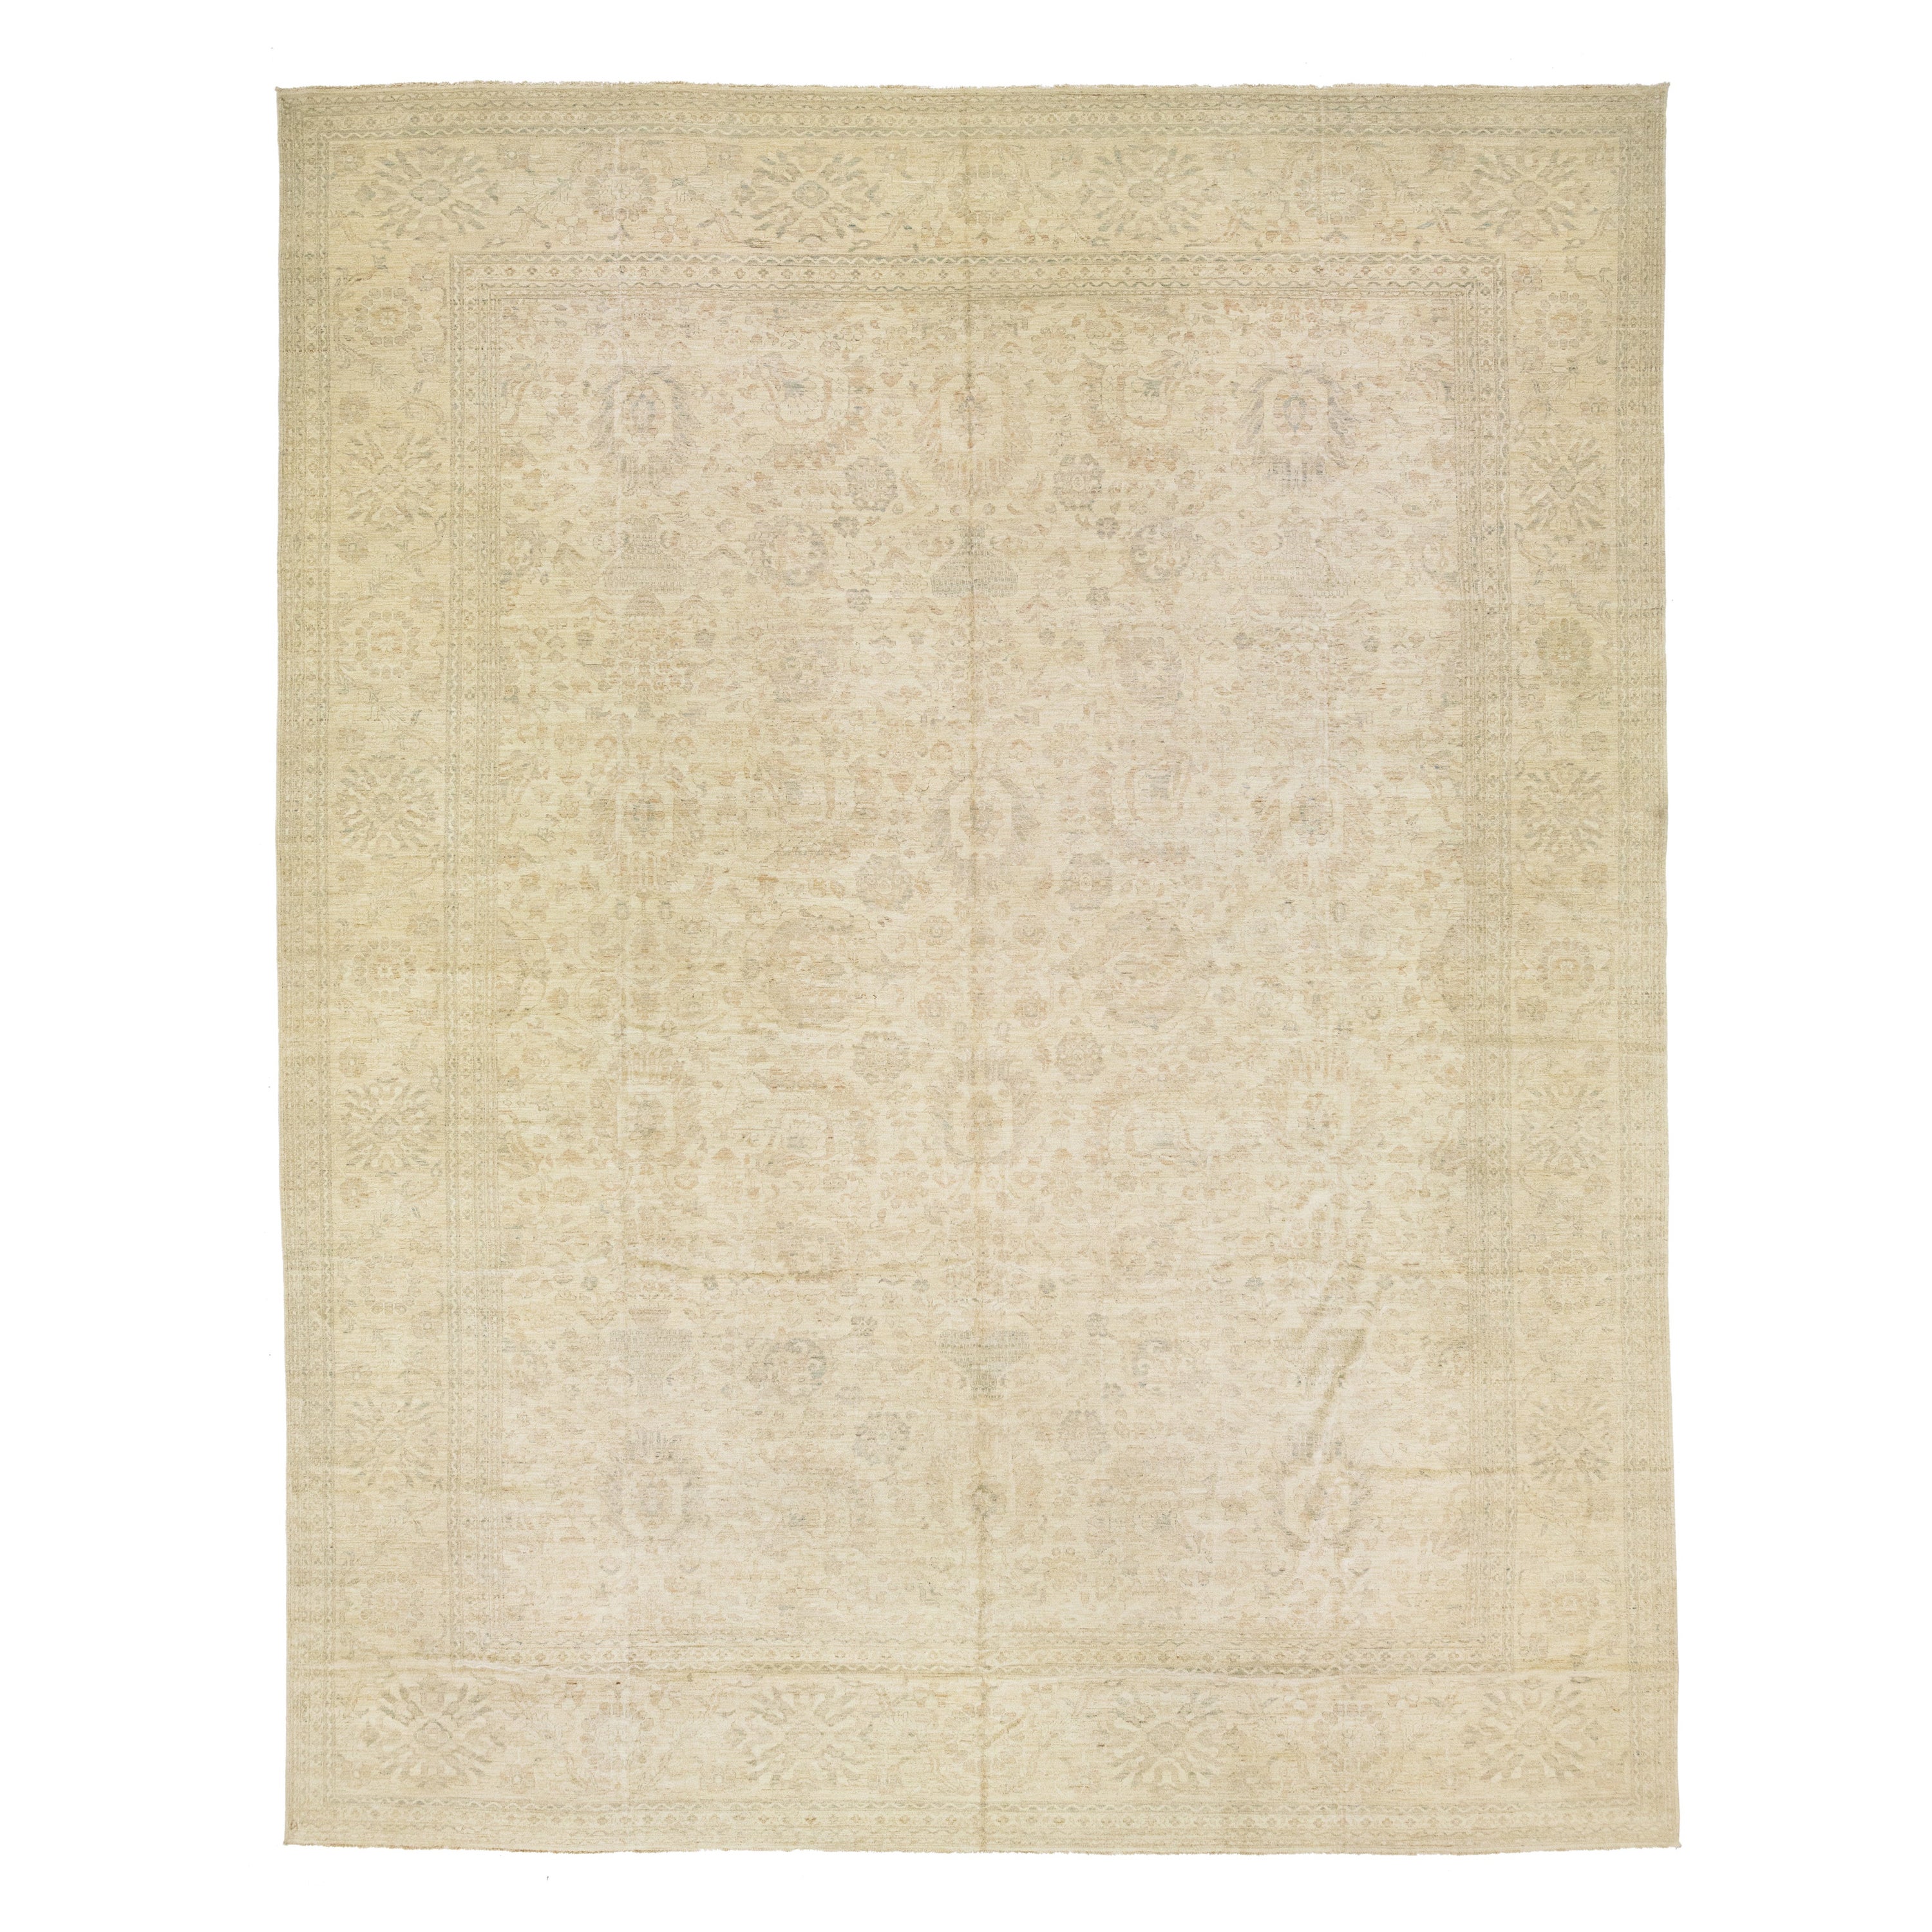 Beige Contemporary Oversize Khotan Style Wool Rug with Allover Motif